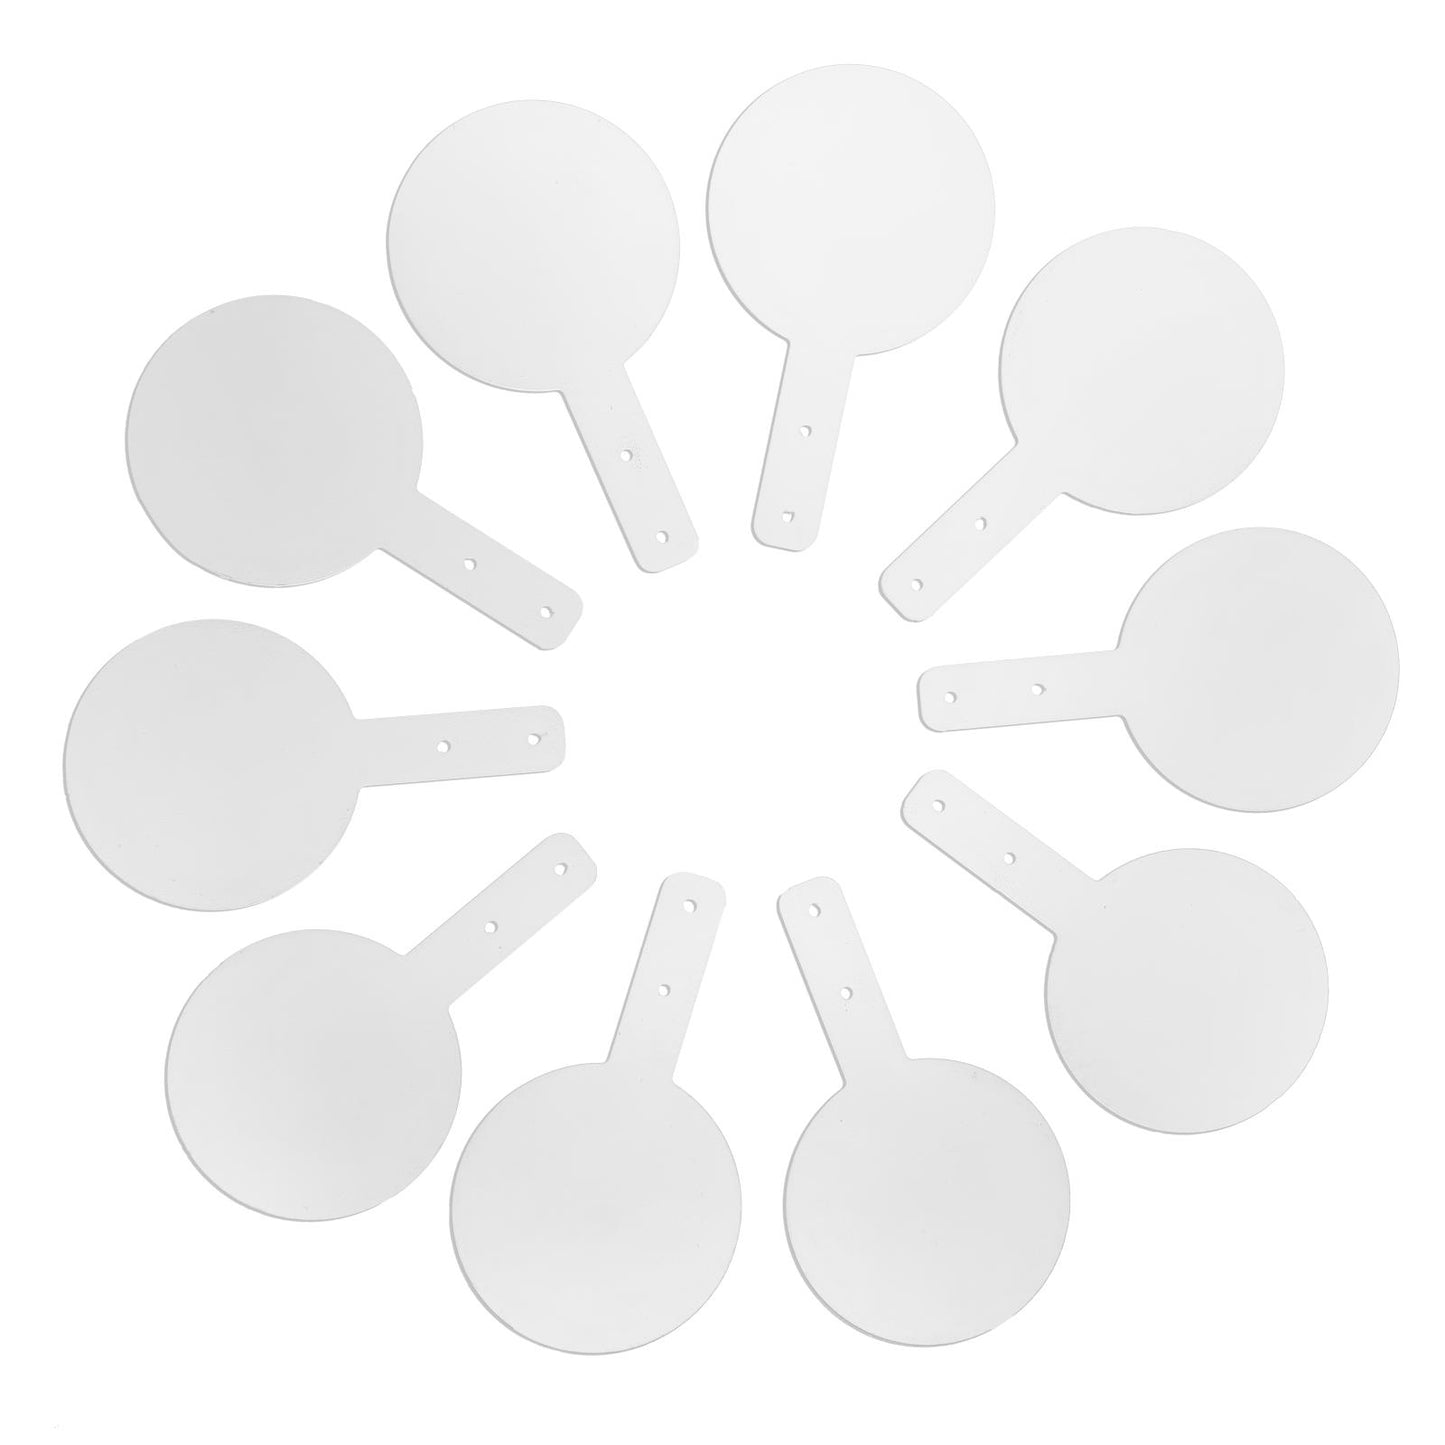 Atflbox Airsoft Shooting Target Stand Accessories 10 Pieces of White Targets (84mm)